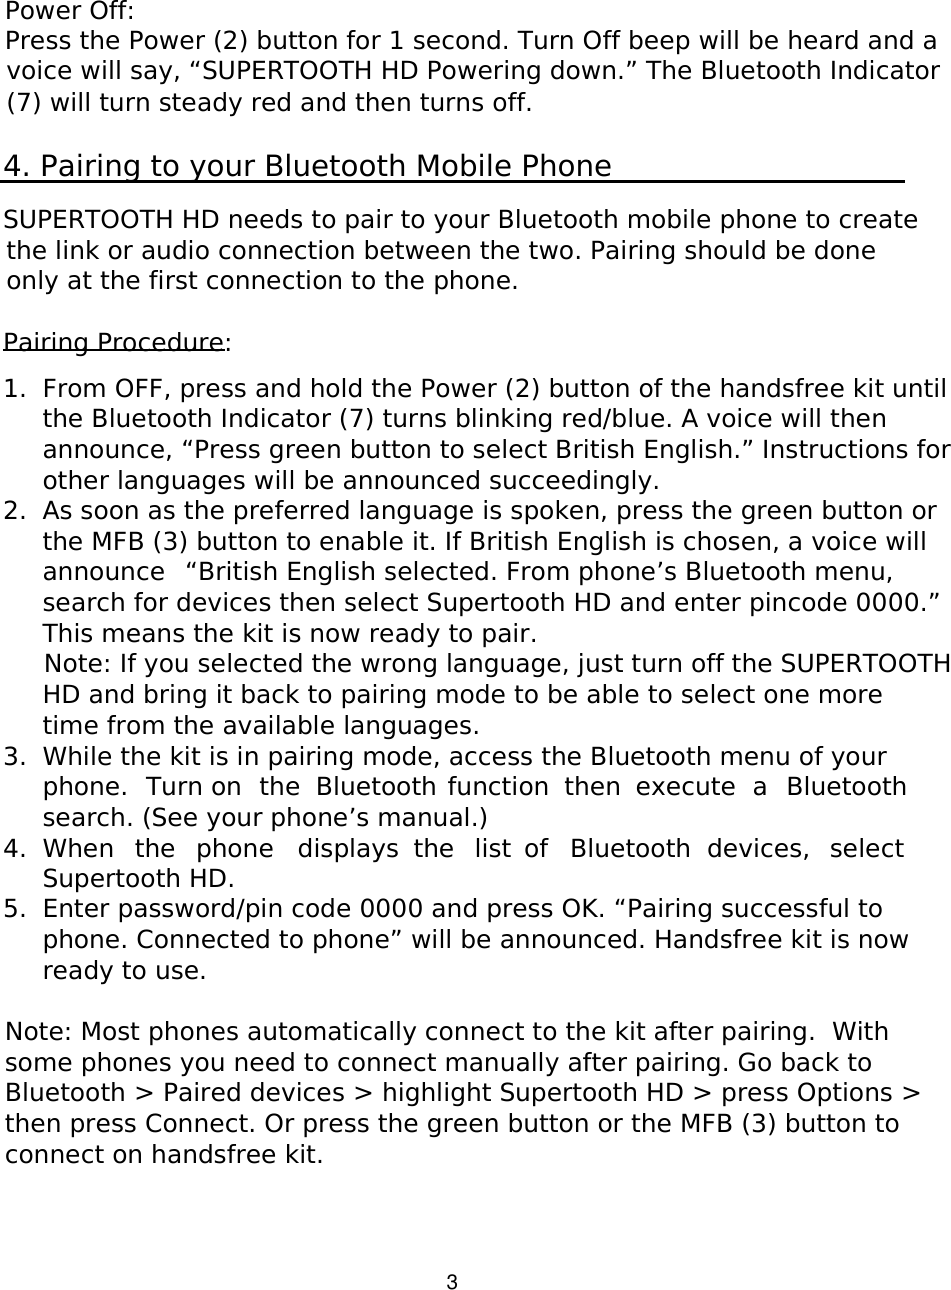   3 Power Off:  Press the Power (2) button for 1 second. Turn Off beep will be heard and a voice will say, “SUPERTOOTH HD Powering down.” The Bluetooth Indicator (7) will turn steady red and then turns off.  4. Pairing to your Bluetooth Mobile Phone  SUPERTOOTH HD needs to pair to your Bluetooth mobile phone to create the link or audio connection between the two. Pairing should be done only at the first connection to the phone.  Pairing Procedure:  1. From OFF, press and hold the Power (2) button of the handsfree kit until the Bluetooth Indicator (7) turns blinking red/blue. A voice will then announce, “Press green button to select British English.” Instructions for other languages will be announced succeedingly. 2. As soon as the preferred language is spoken, press the green button or the MFB (3) button to enable it. If British English is chosen, a voice will announce  “British English selected. From phone’s Bluetooth menu, search for devices then select Supertooth HD and enter pincode 0000.” This means the kit is now ready to pair.  Note: If you selected the wrong language, just turn off the SUPERTOOTH HD and bring it back to pairing mode to be able to select one more time from the available languages. 3. While the kit is in pairing mode, access the Bluetooth menu of your phone.  Turn on  the  Bluetooth function  then  execute  a  Bluetooth search. (See your phone’s manual.) 4. When  the  phone  displays  the  list  of  Bluetooth  devices,  select Supertooth HD.  5. Enter password/pin code 0000 and press OK. “Pairing successful to phone. Connected to phone” will be announced. Handsfree kit is now ready to use.  Note: Most phones automatically connect to the kit after pairing.  With some phones you need to connect manually after pairing. Go back to Bluetooth &gt; Paired devices &gt; highlight Supertooth HD &gt; press Options &gt; then press Connect. Or press the green button or the MFB (3) button to connect on handsfree kit.    